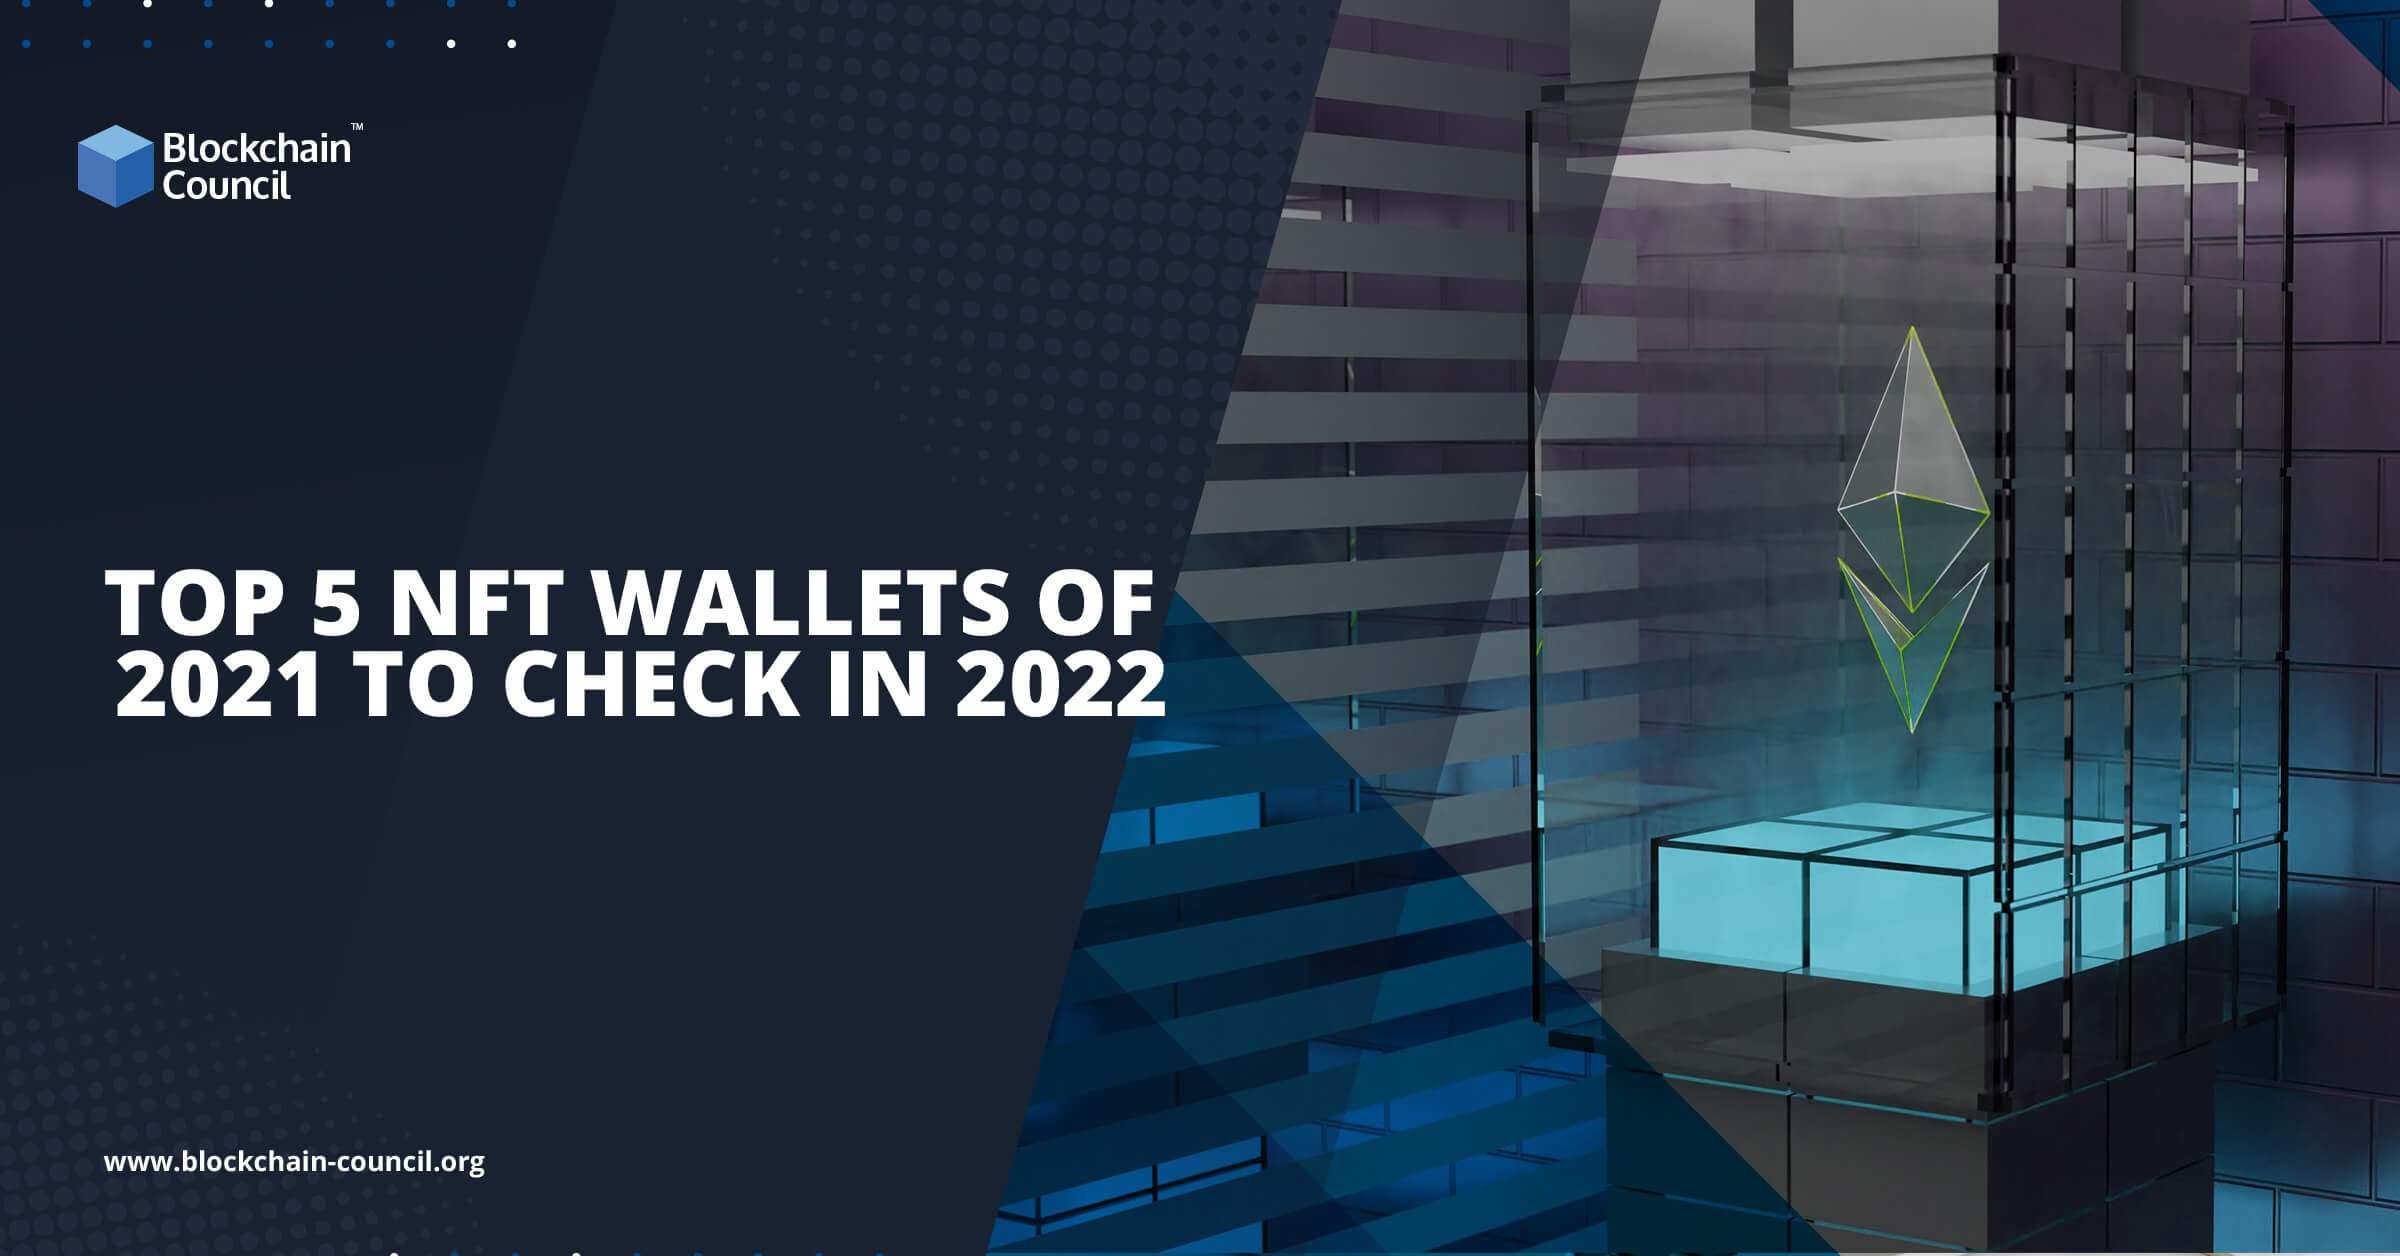 Top 5 NFT wallets of 2021 to Check in 2022